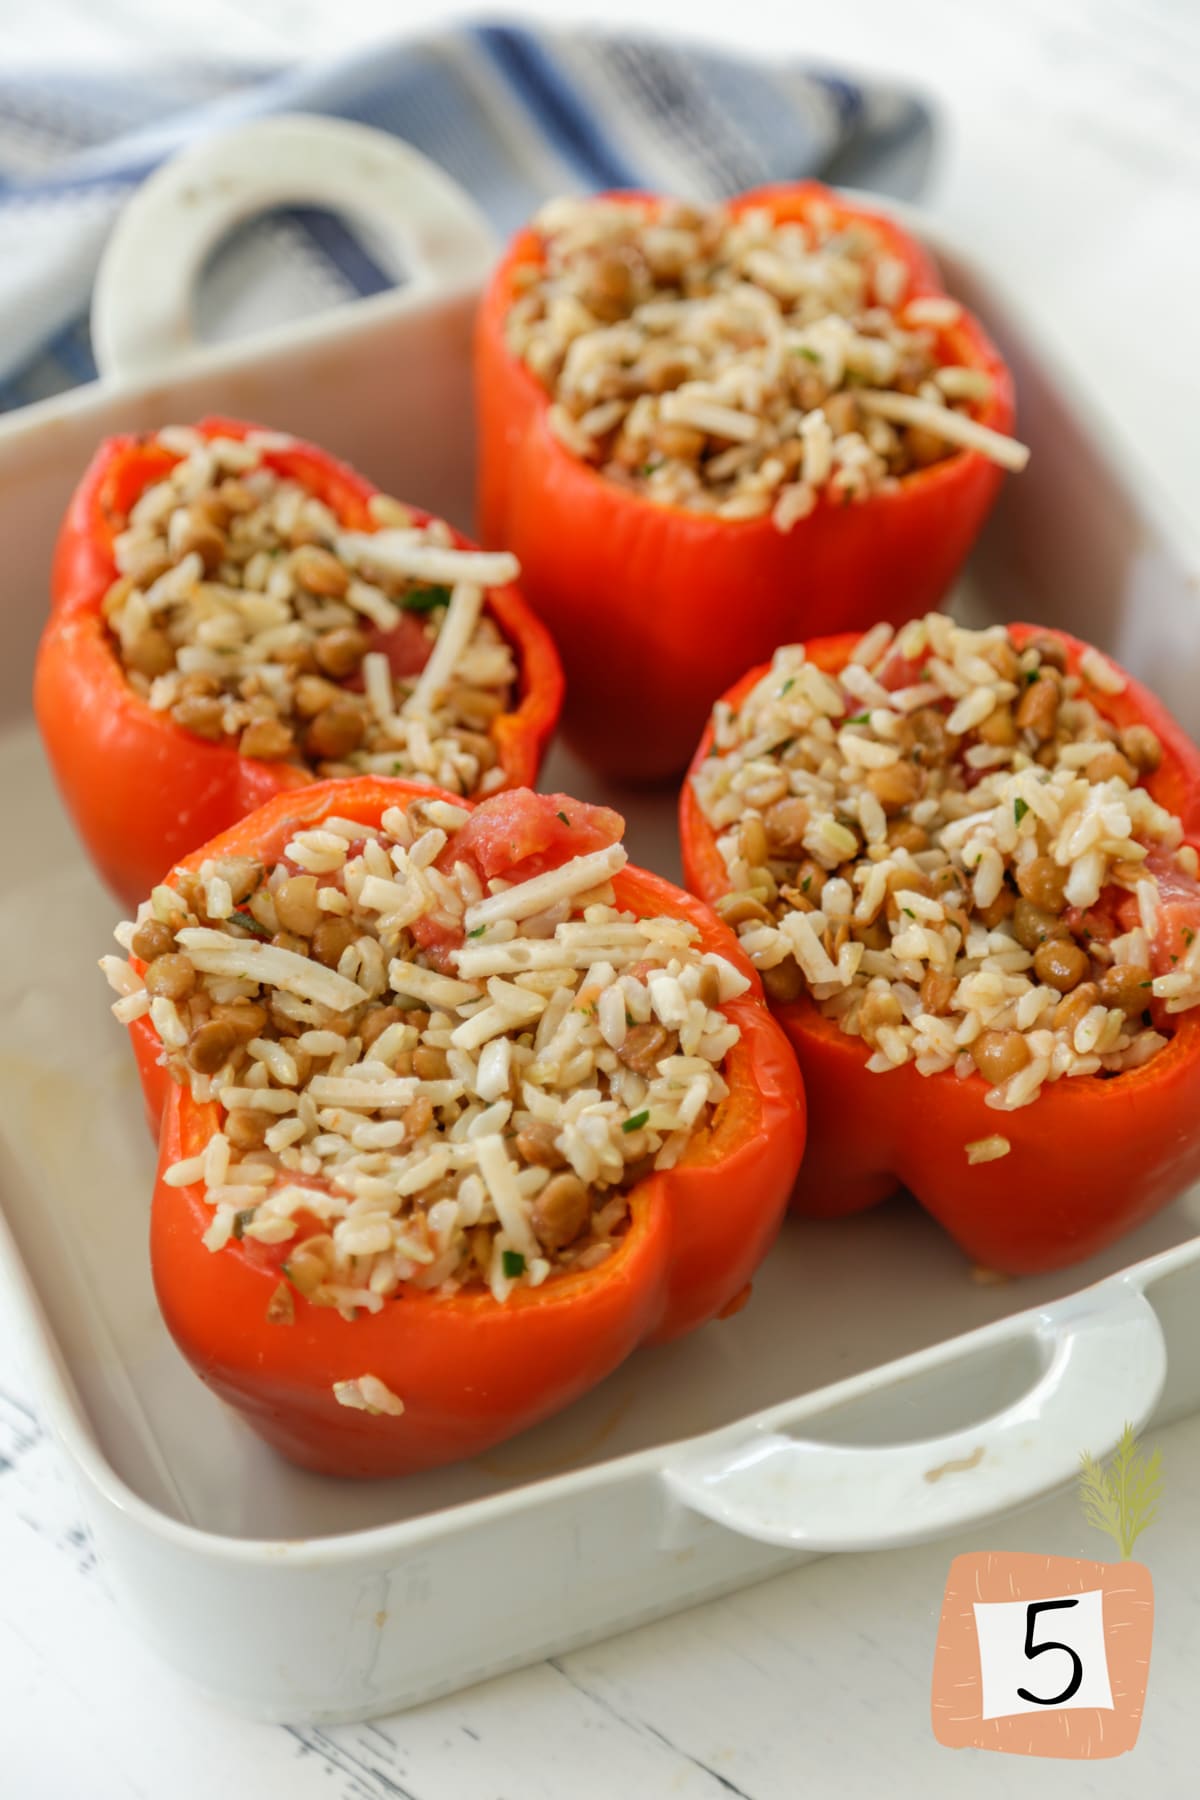 Unbaked stuffed peppers in a baking dish.